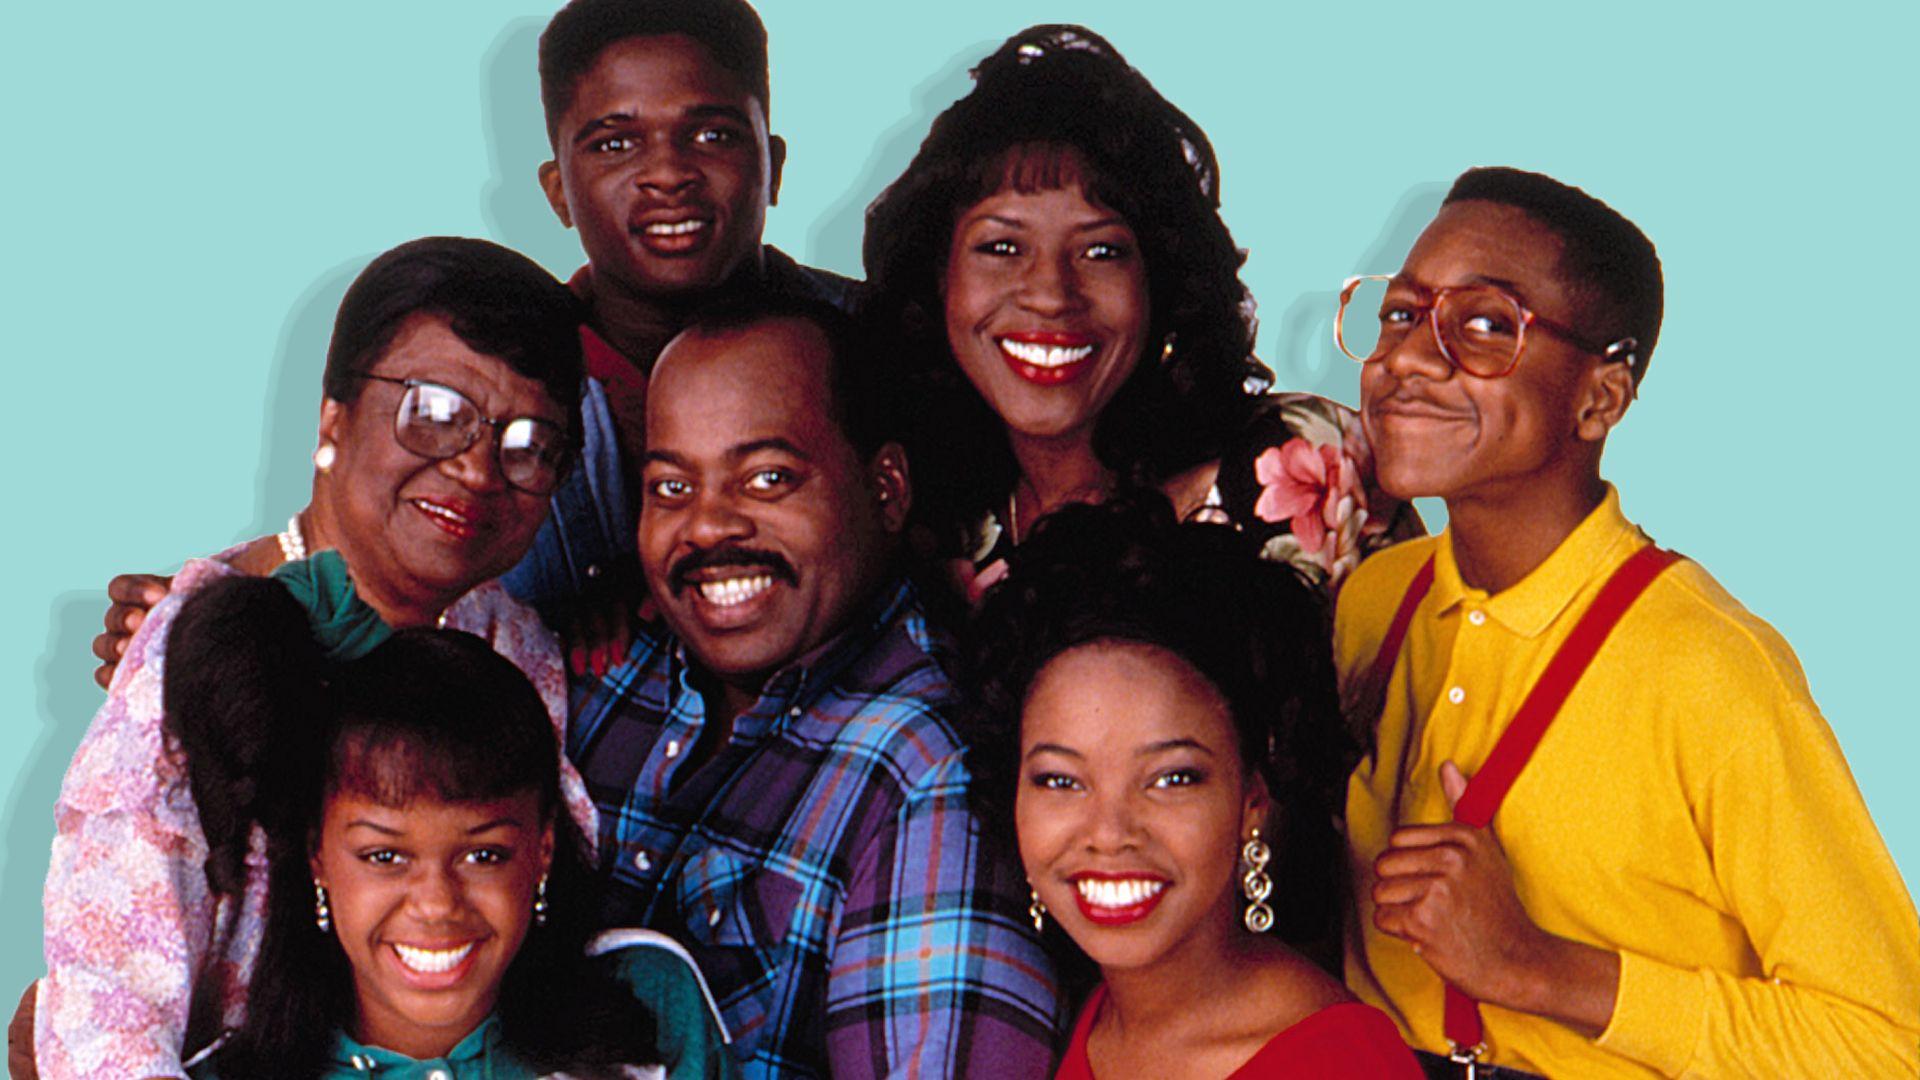 Family Matters' cast reunites for interview, look back at classic sitcom